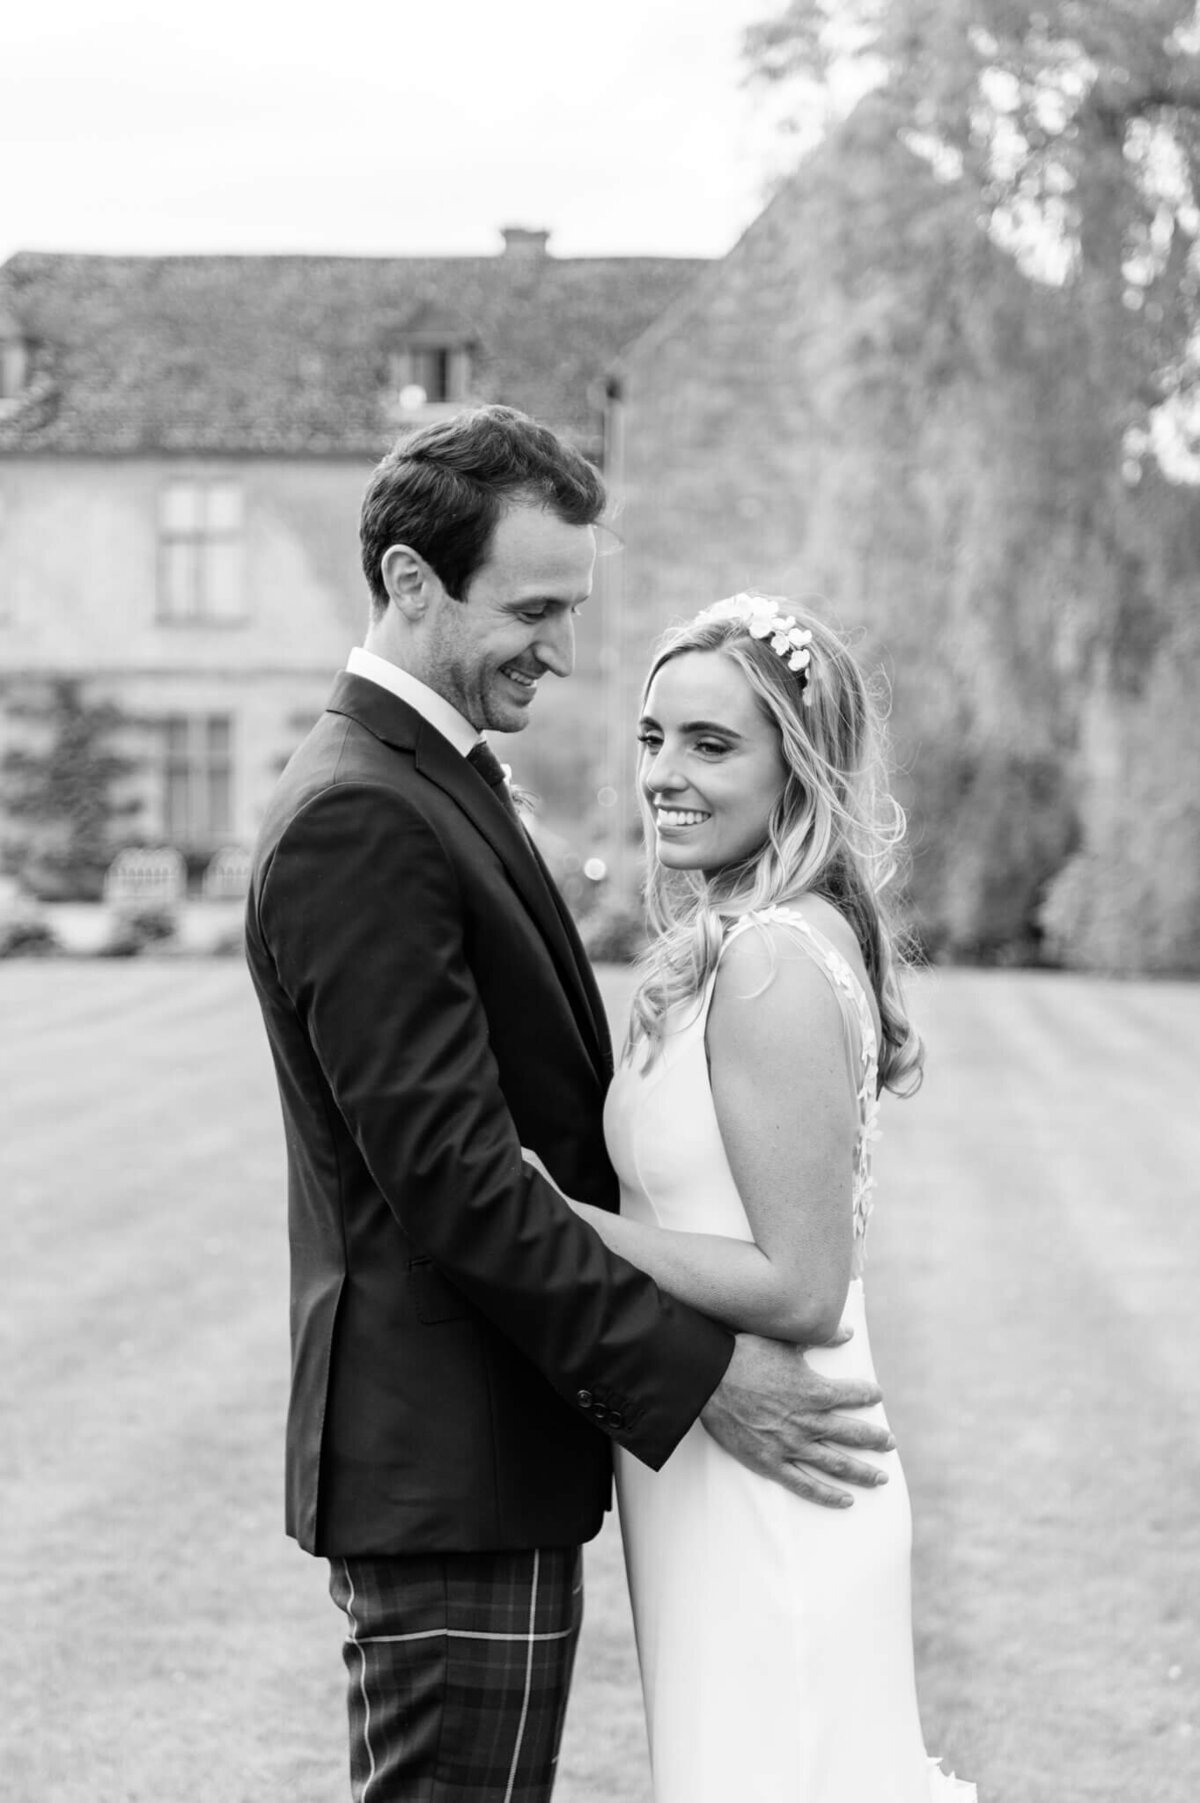 Chloe Bolam - Cotswolds Wedding Photographer - The Compton Gallery Wedding Photographer - V & C - 04.06.22 - 7